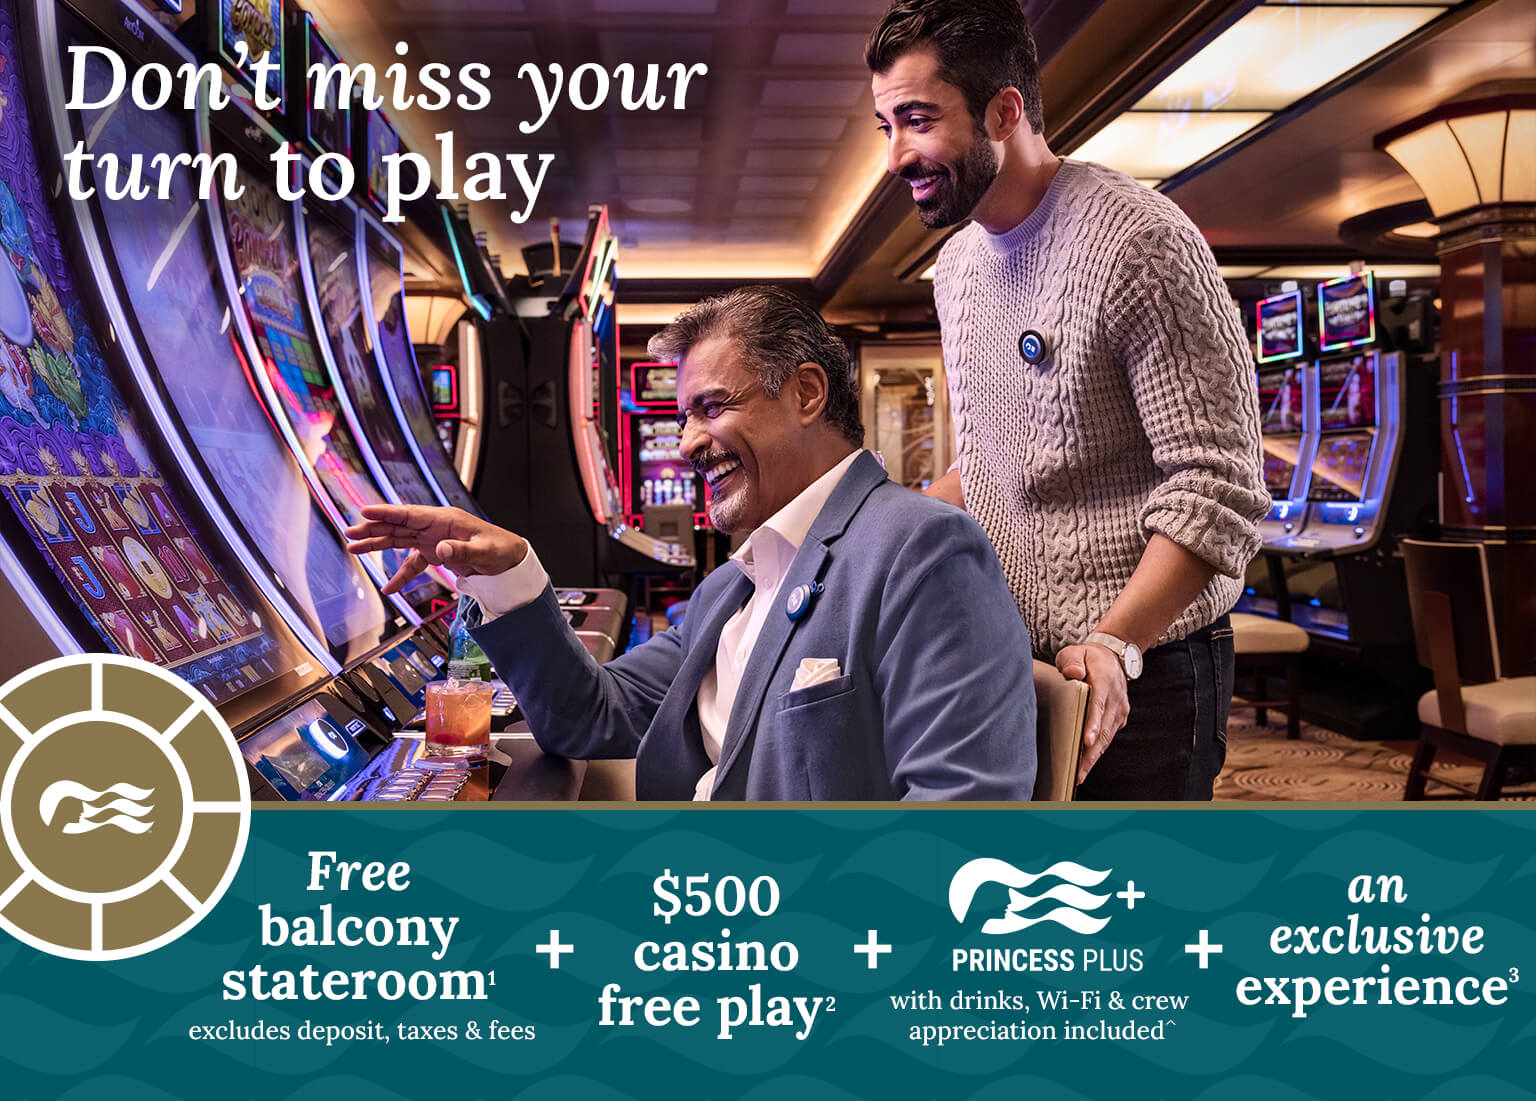 Group of people playing slots. free mini-suite, excludes taxes, deposit & fees. Click here to book.